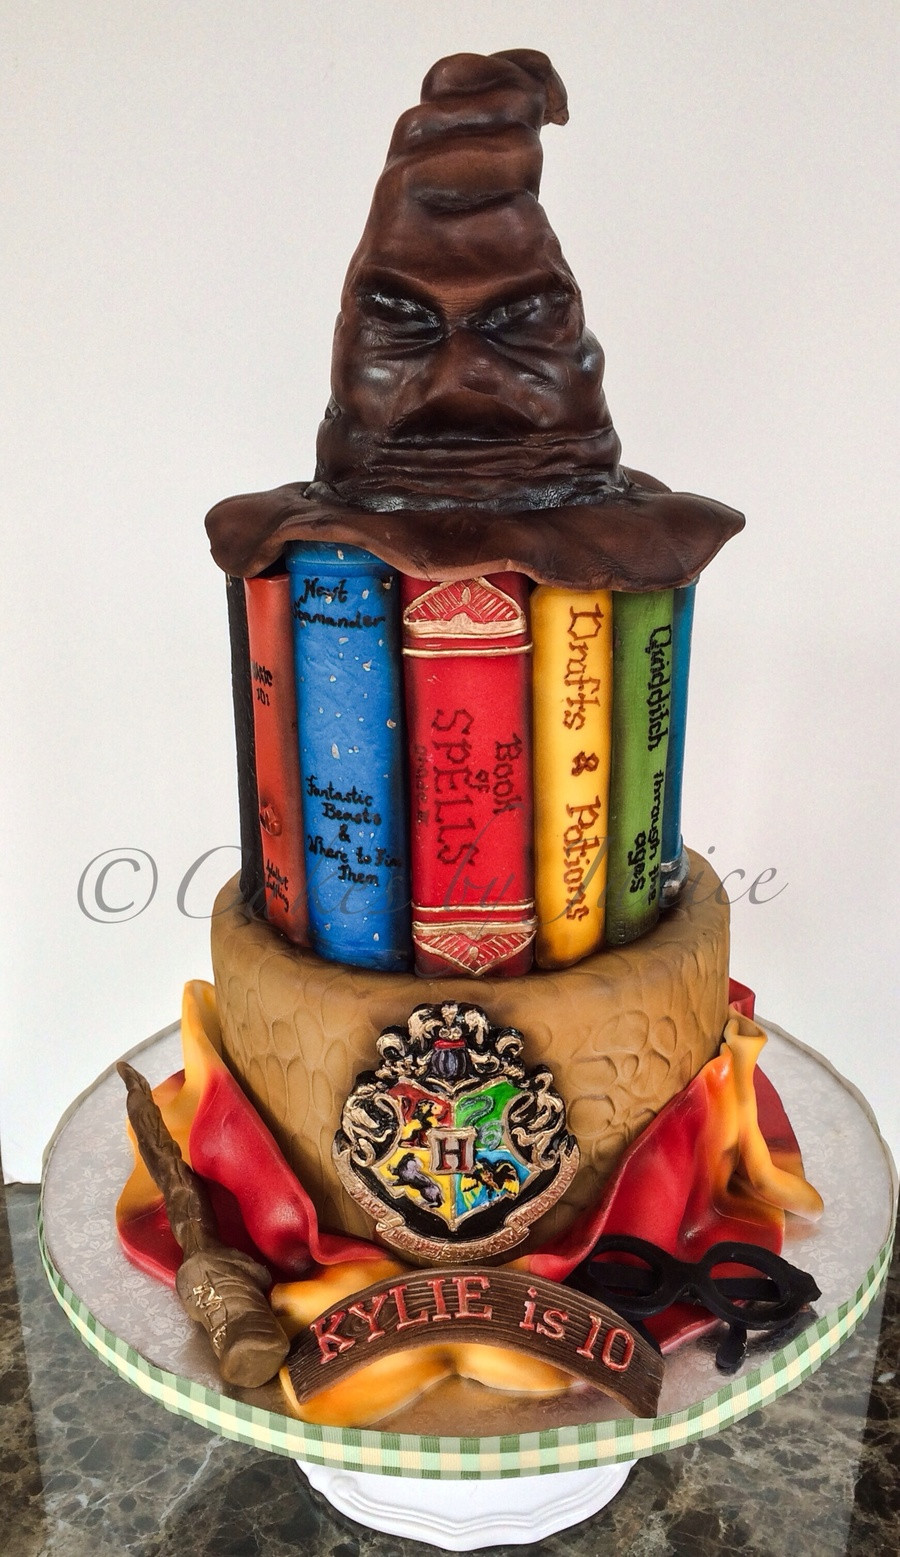 Harry Potter Birthday Cakes
 Harry Potter Themed 6 And 8 Inch Cake Wand Eyeglasses